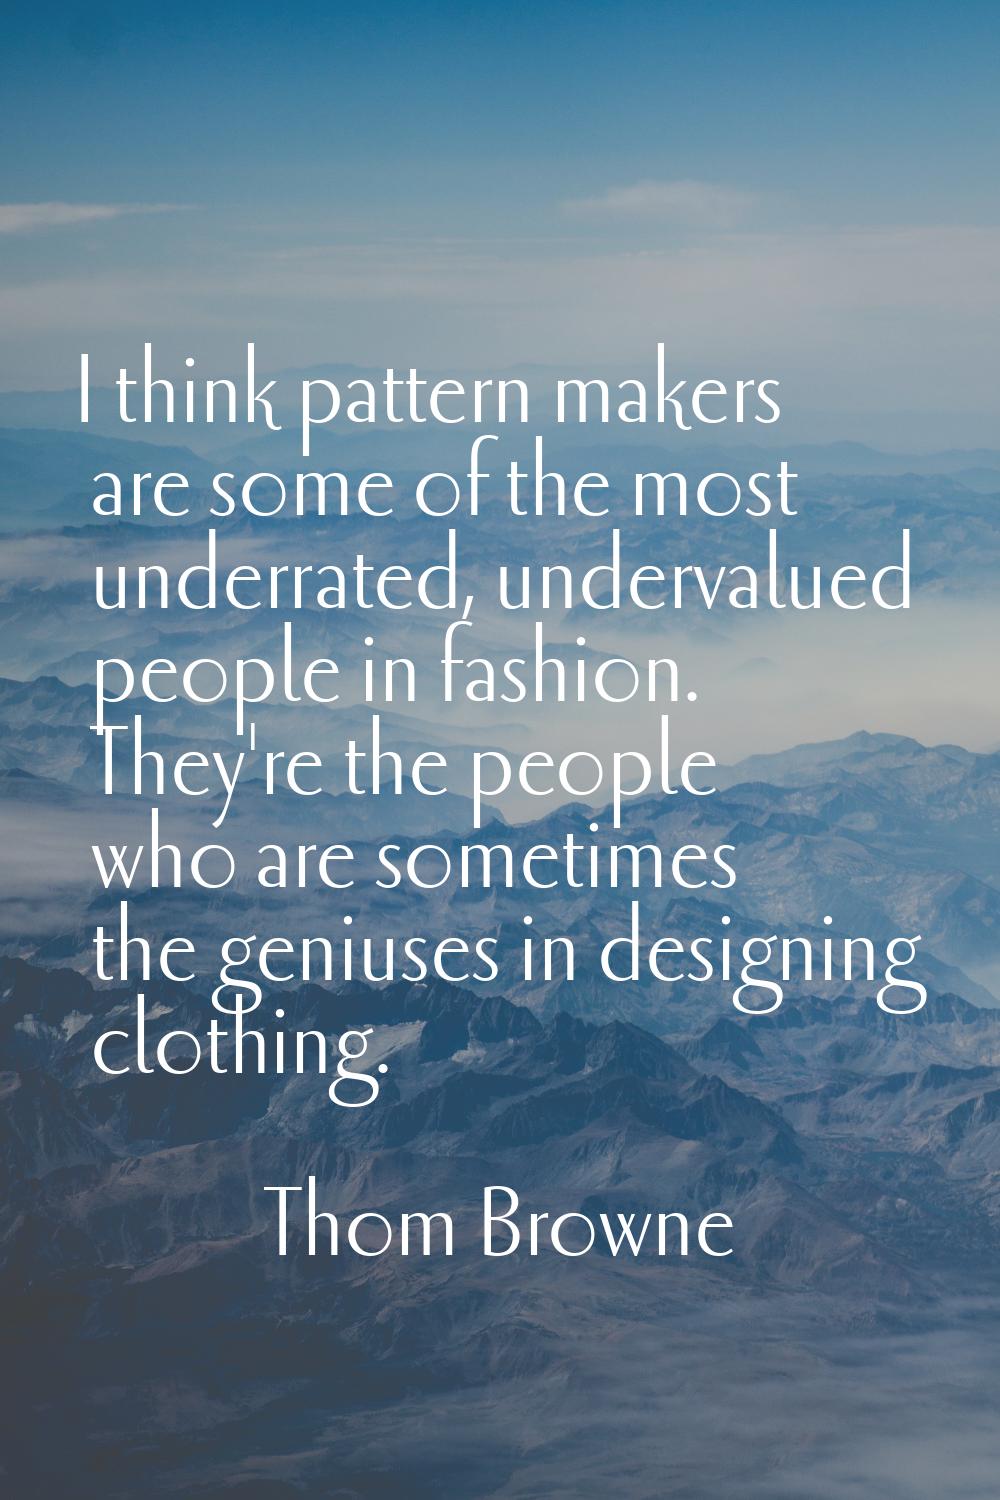 I think pattern makers are some of the most underrated, undervalued people in fashion. They're the 